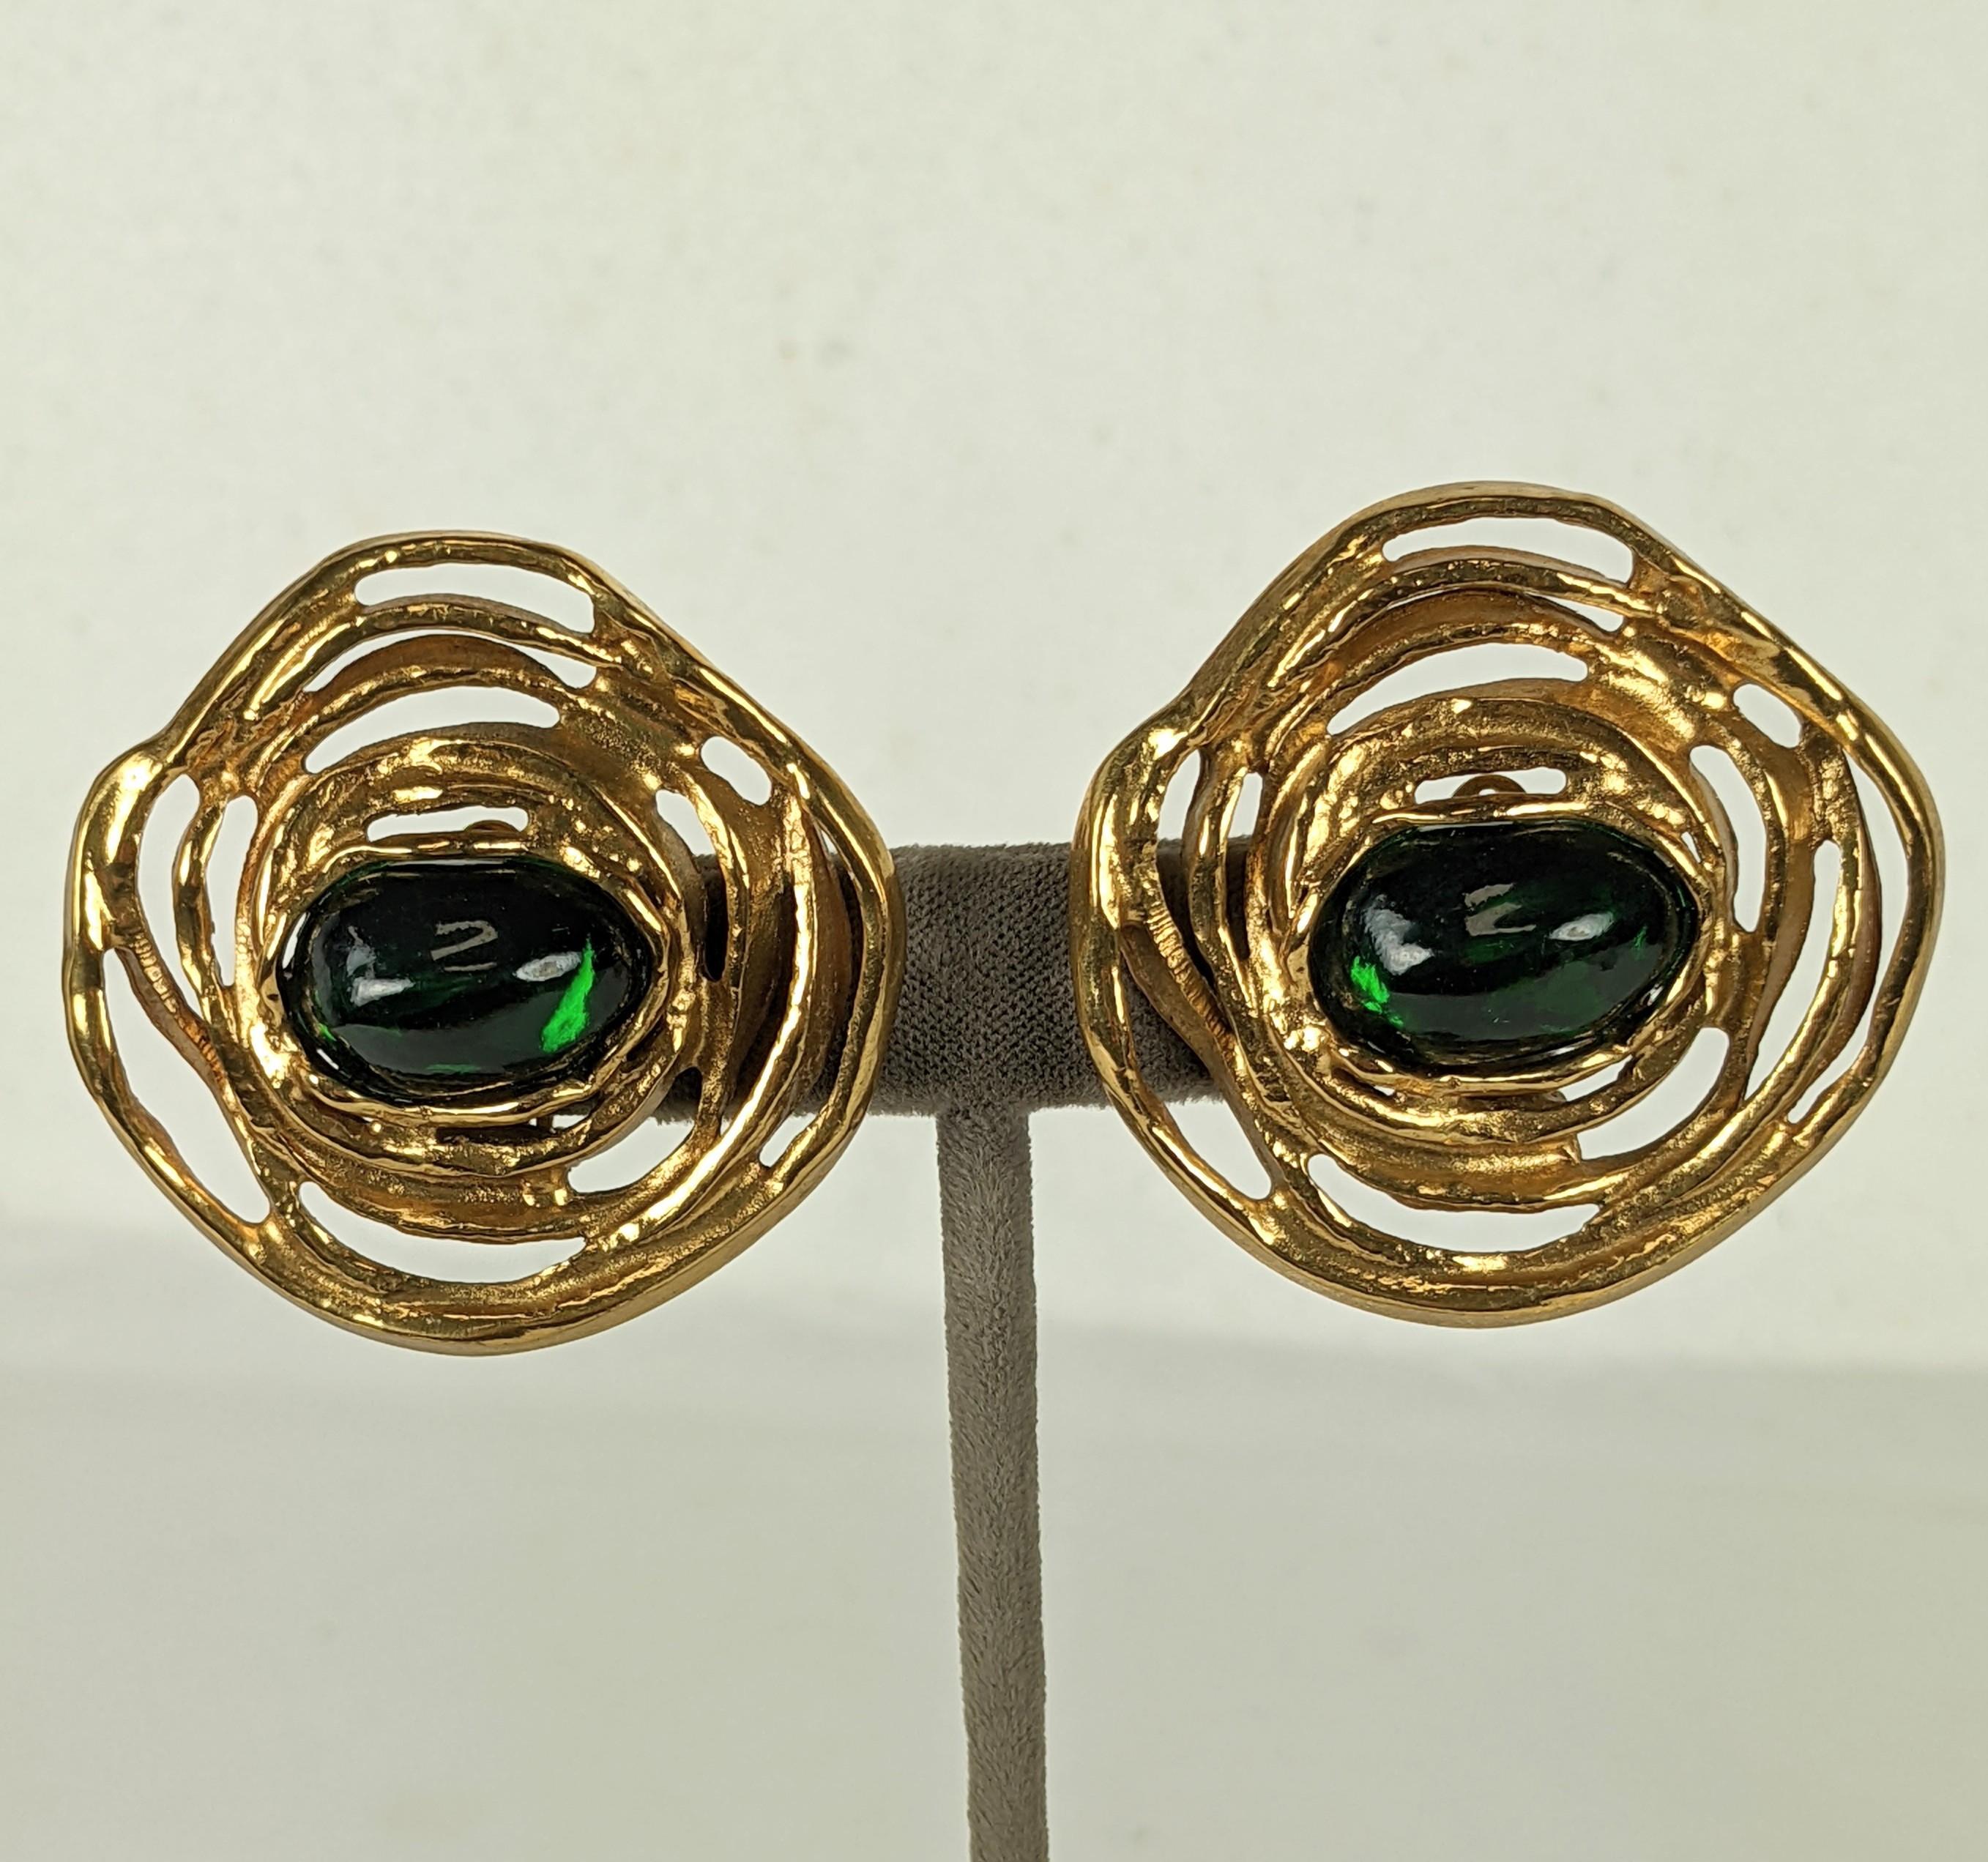 Large Yves Saint Laurent Gilt Spiral Earrings set with a single emerald pate de verre cabochon. Abstract golden ribbons float free form around central cab. Made by Maison Goossens. Clip back fittings.  France Late 1980's.   1.75